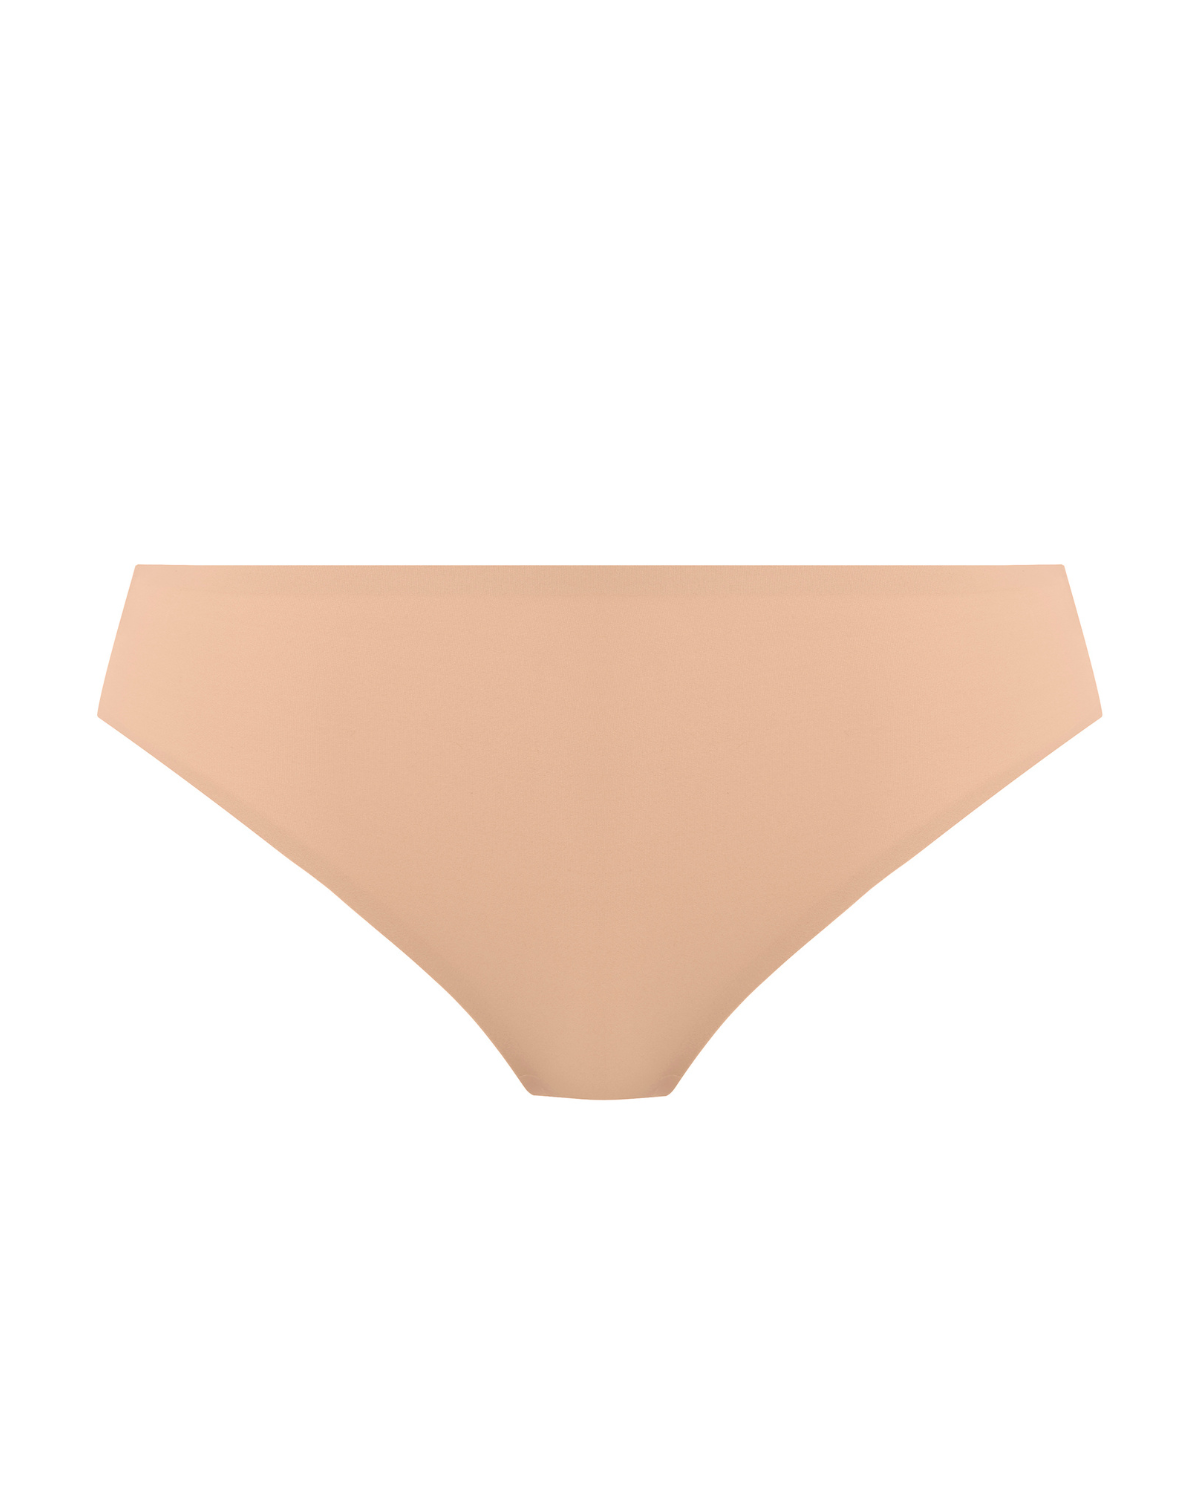 Flat lay of a seamless thong in beige/ nude